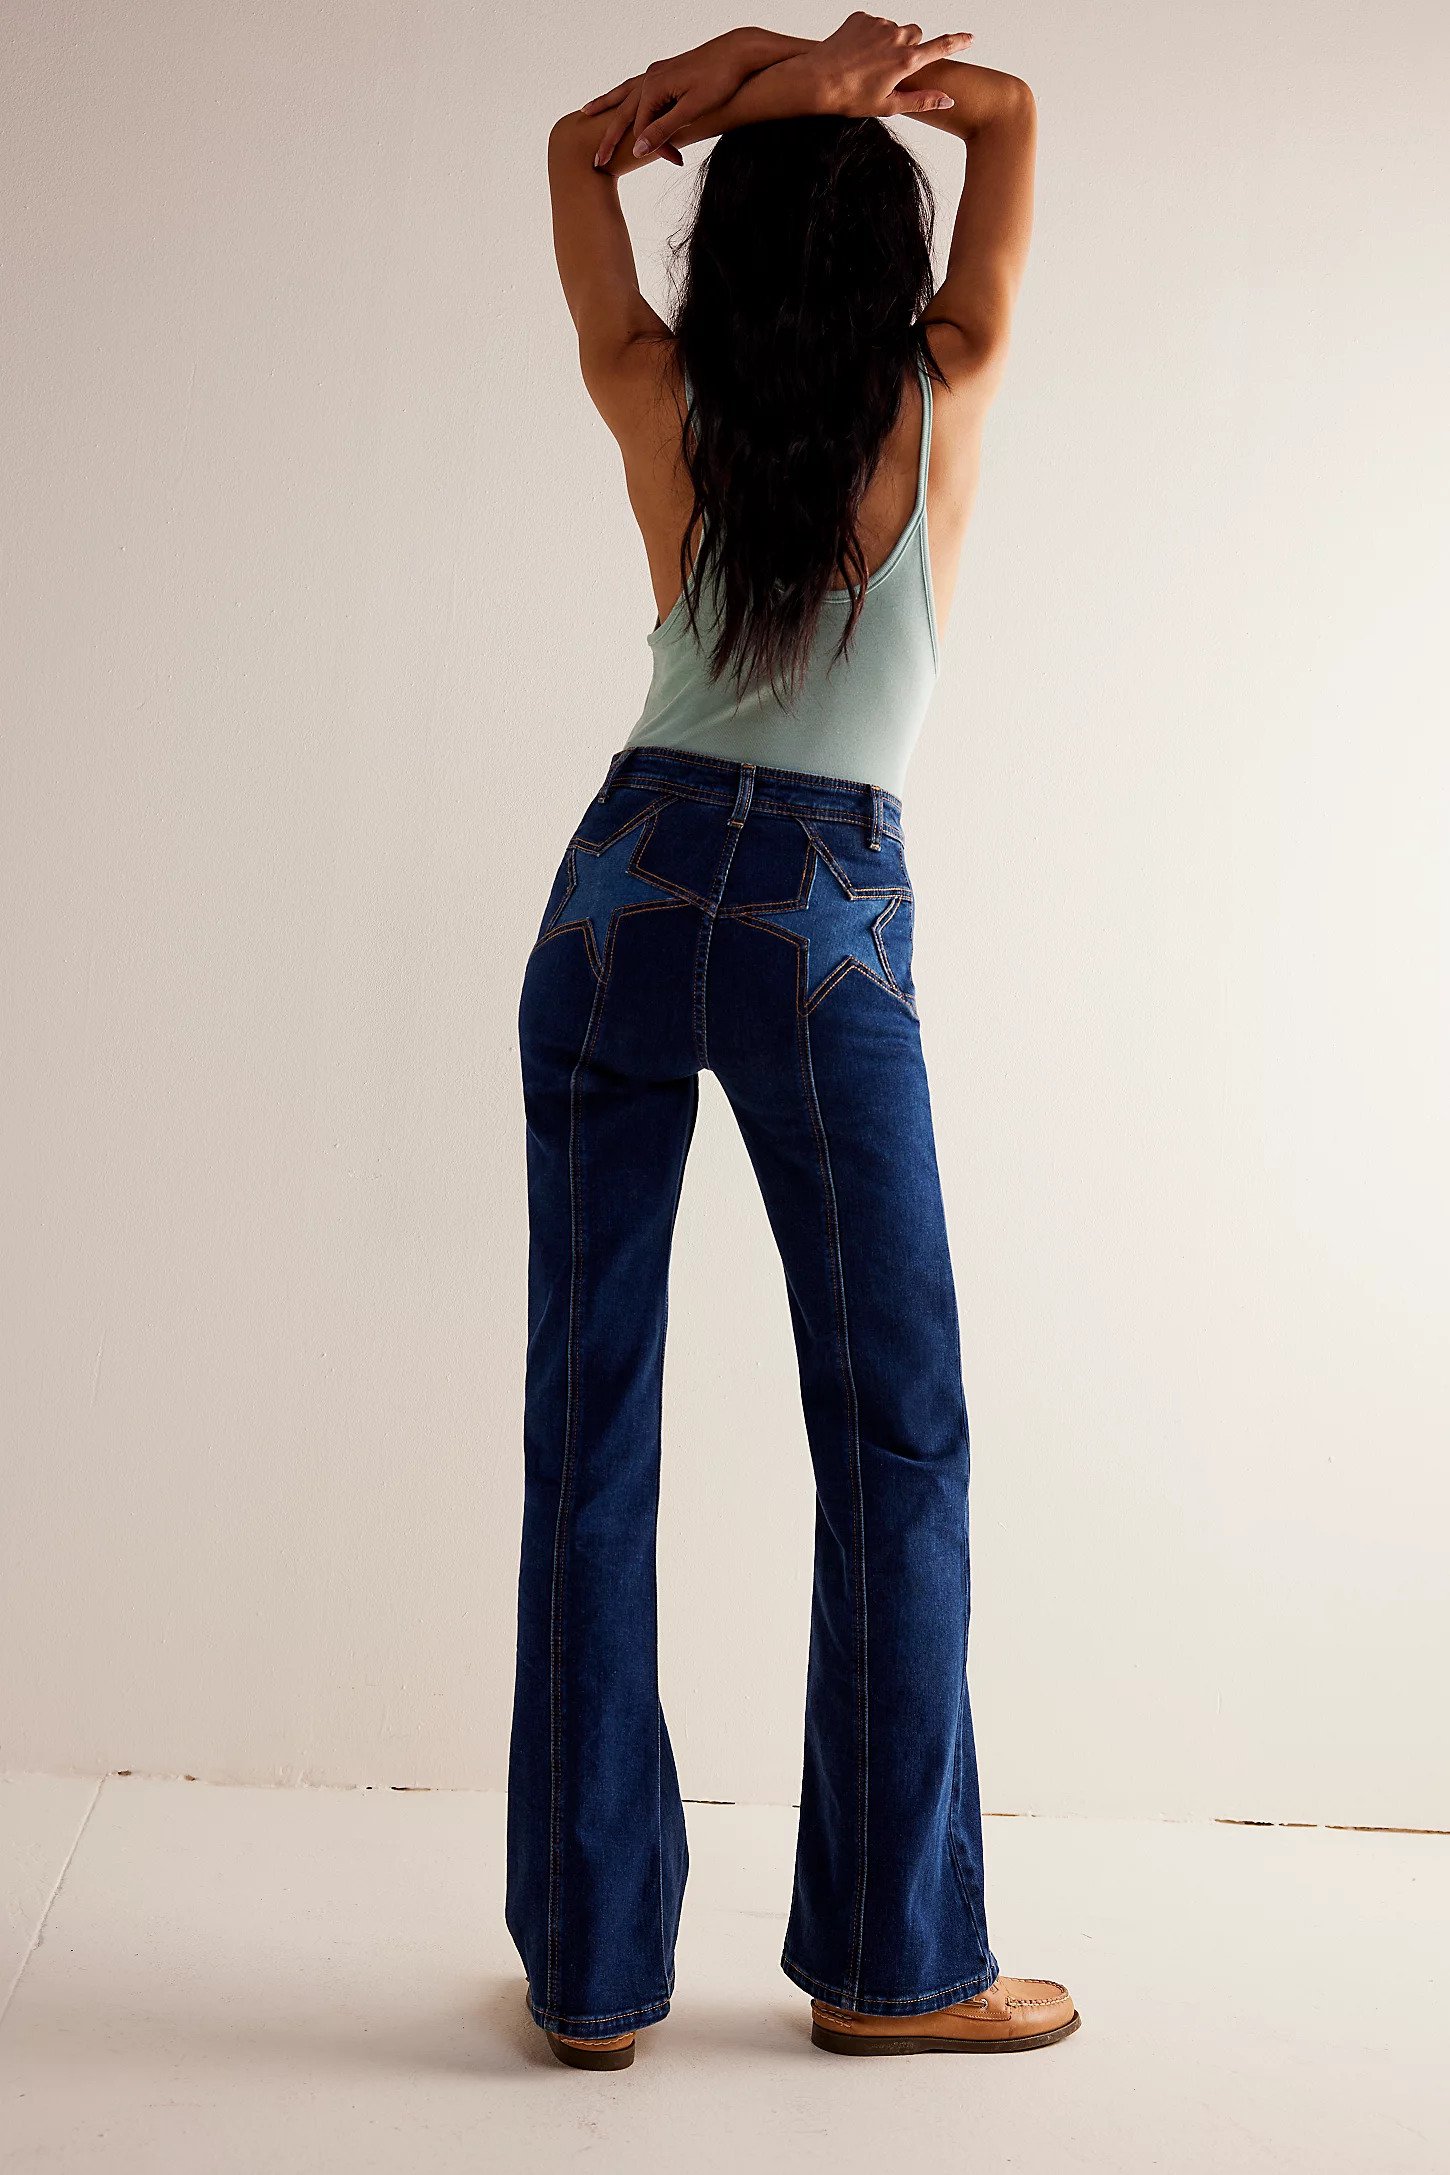 We The Free's New Denim Collection Rivals Designer Buys | Who What Wear UK